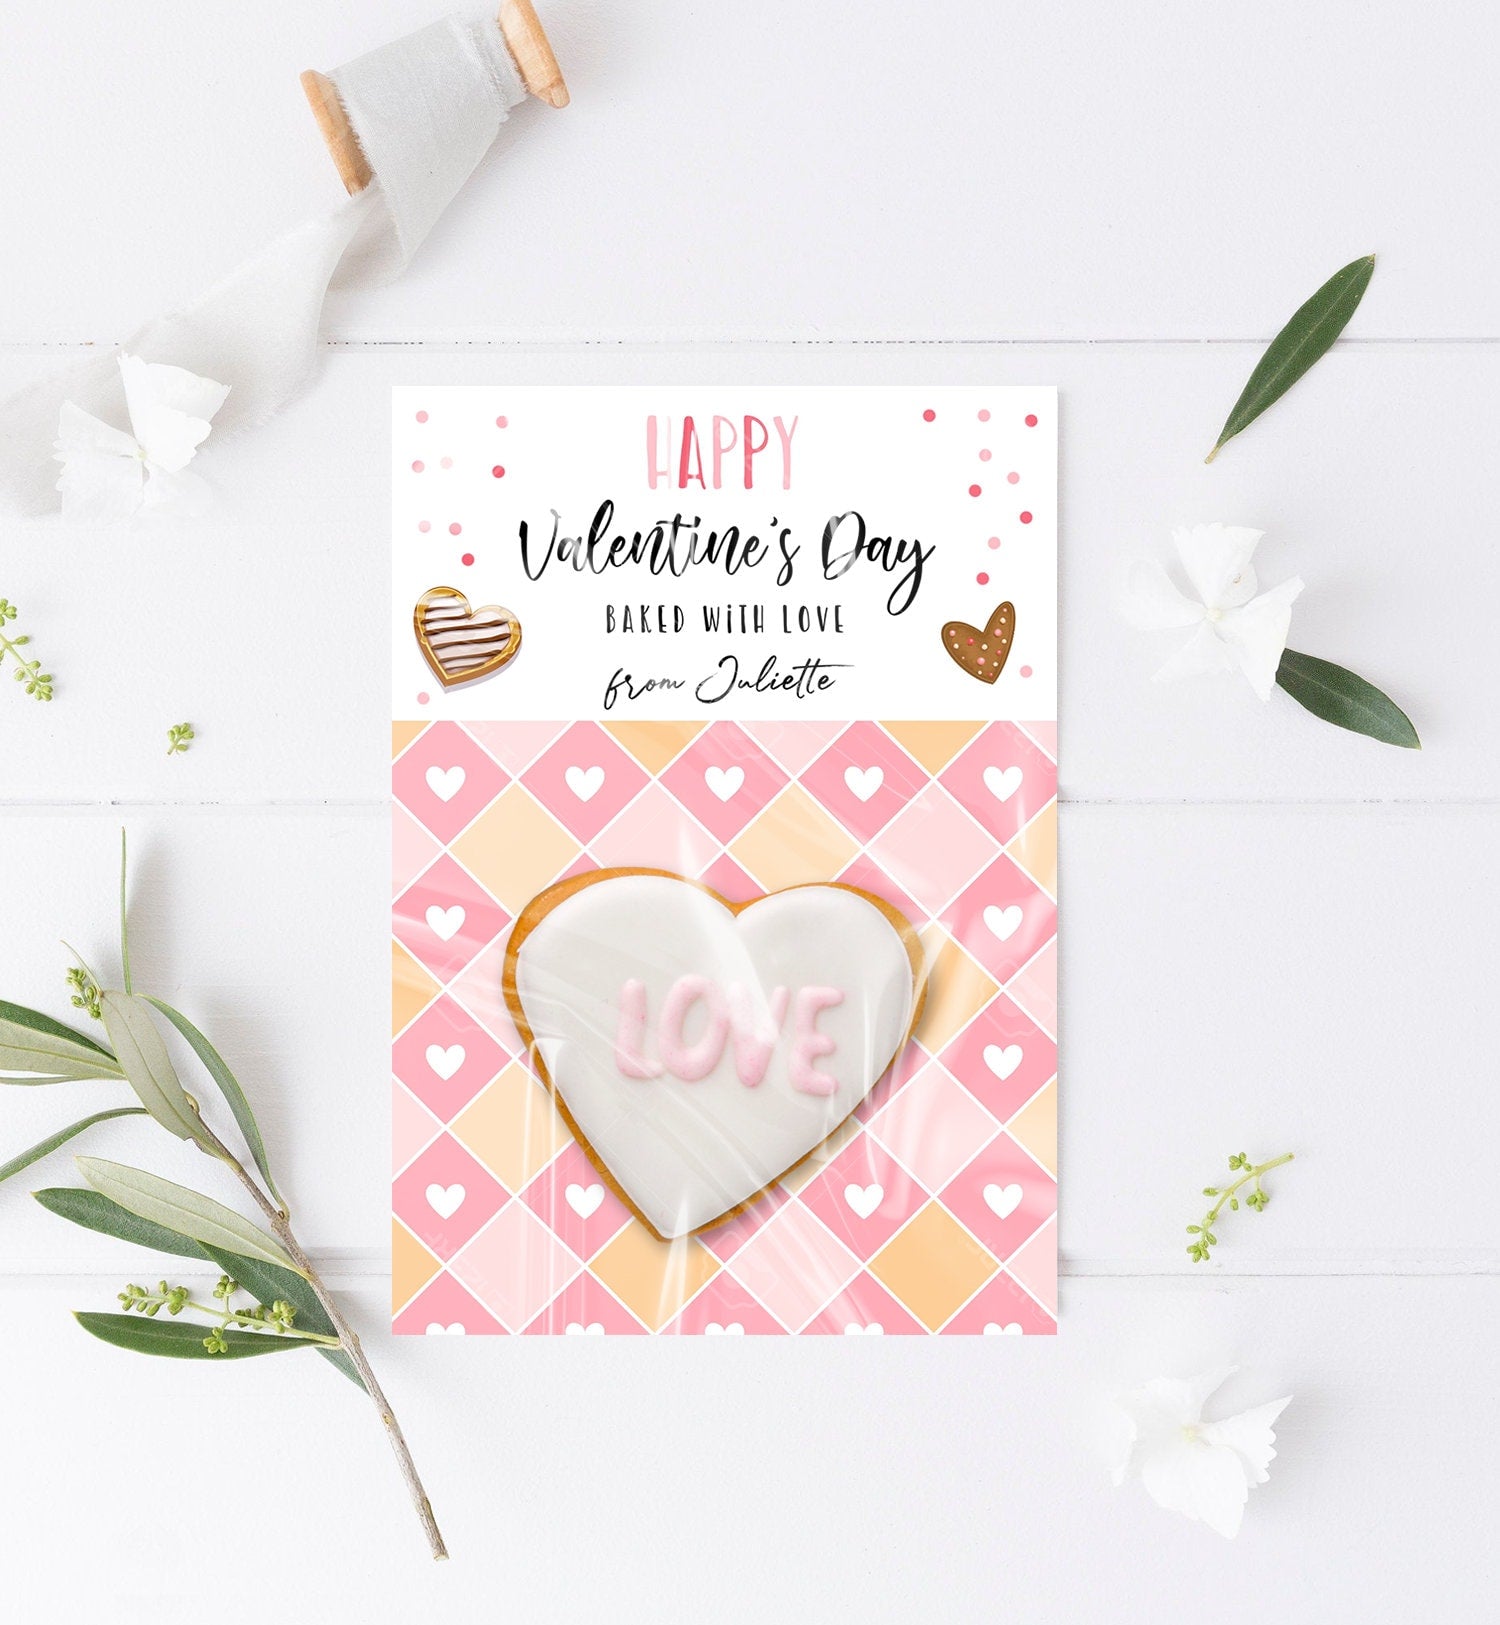 Editable Personalized Cookie Card Happy Valentine's Day Mini Cookie Card Gift Tag Cookie Packaging Printable Download Template Corjl 0370